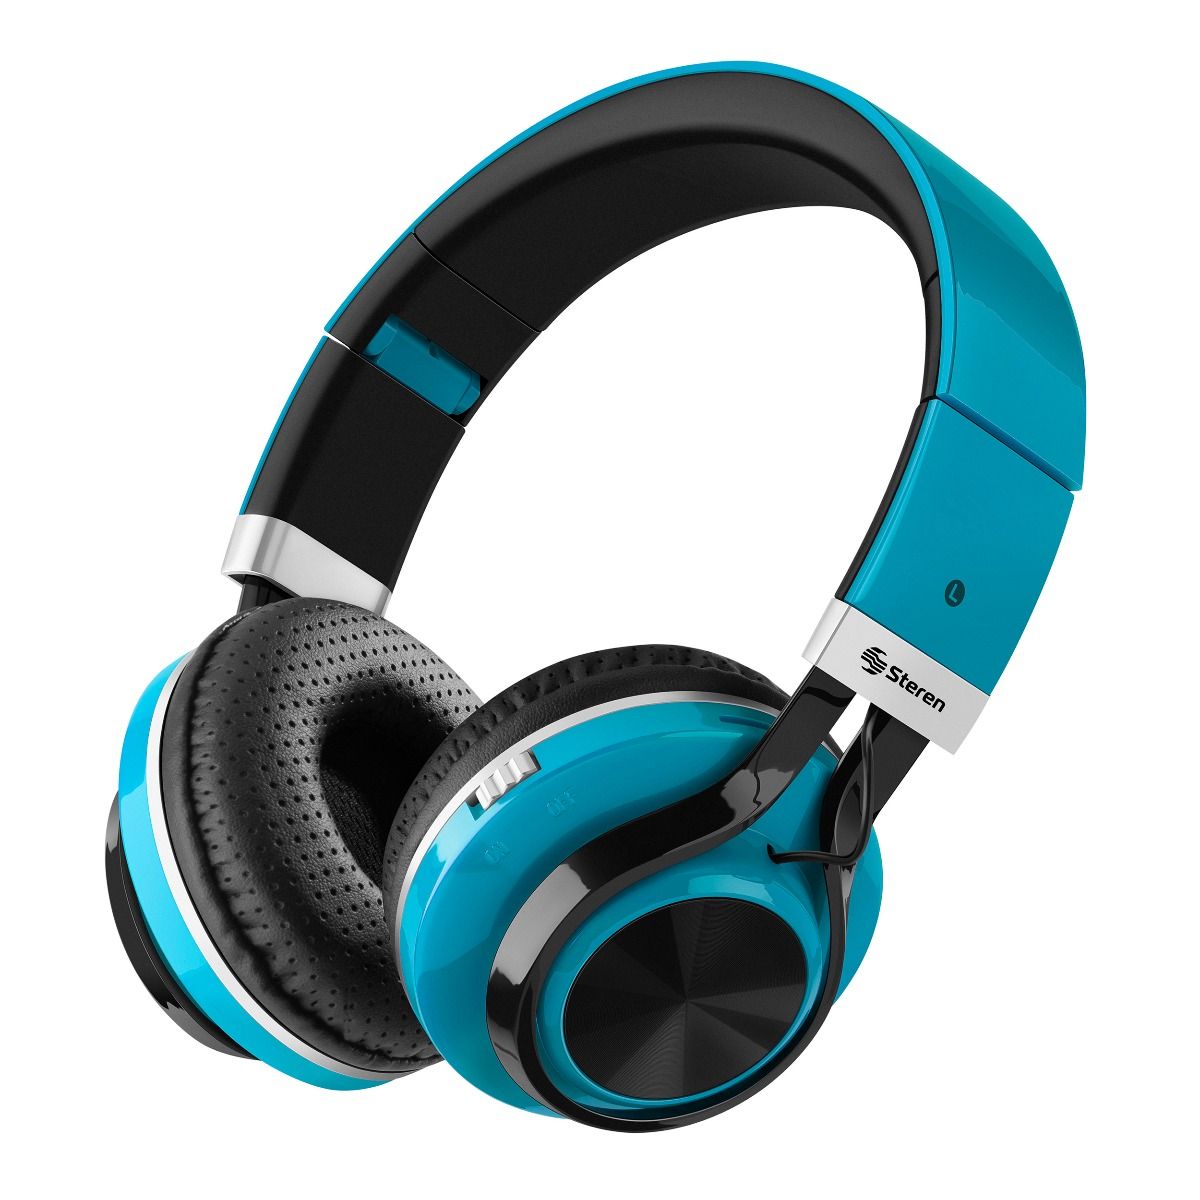 https://www.steren.com.gt/media/catalog/product/cache/532829604b379f478db69368d14615cd/image/20406901e/audifonos-bluetooth-xtreme-con-reproductor-mp3.jpg